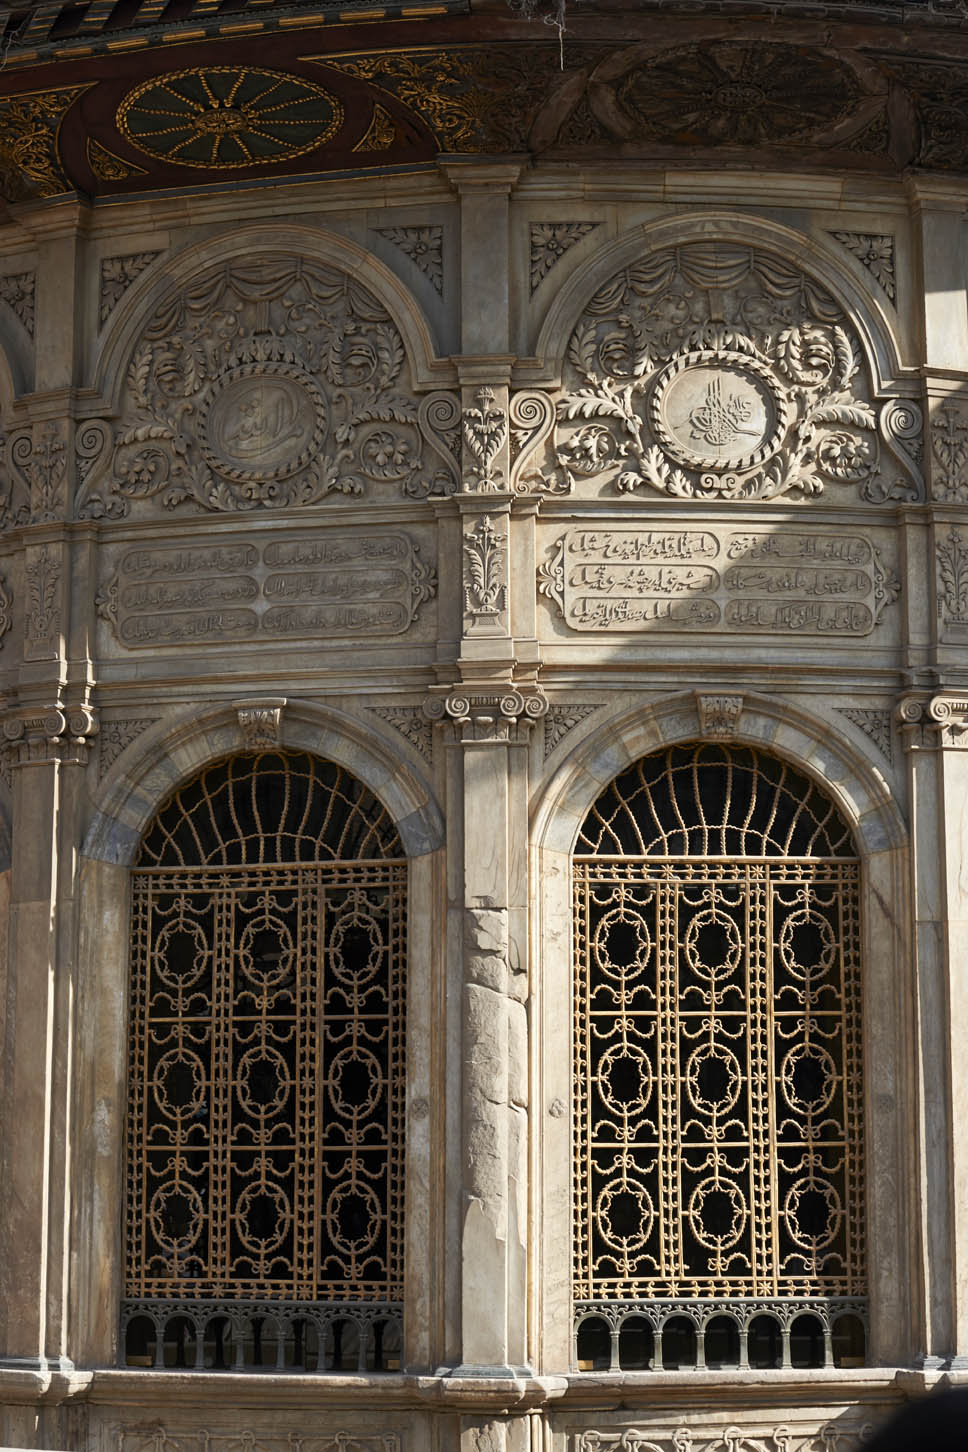 Exterior detail of window grilles and marble inscription plaques